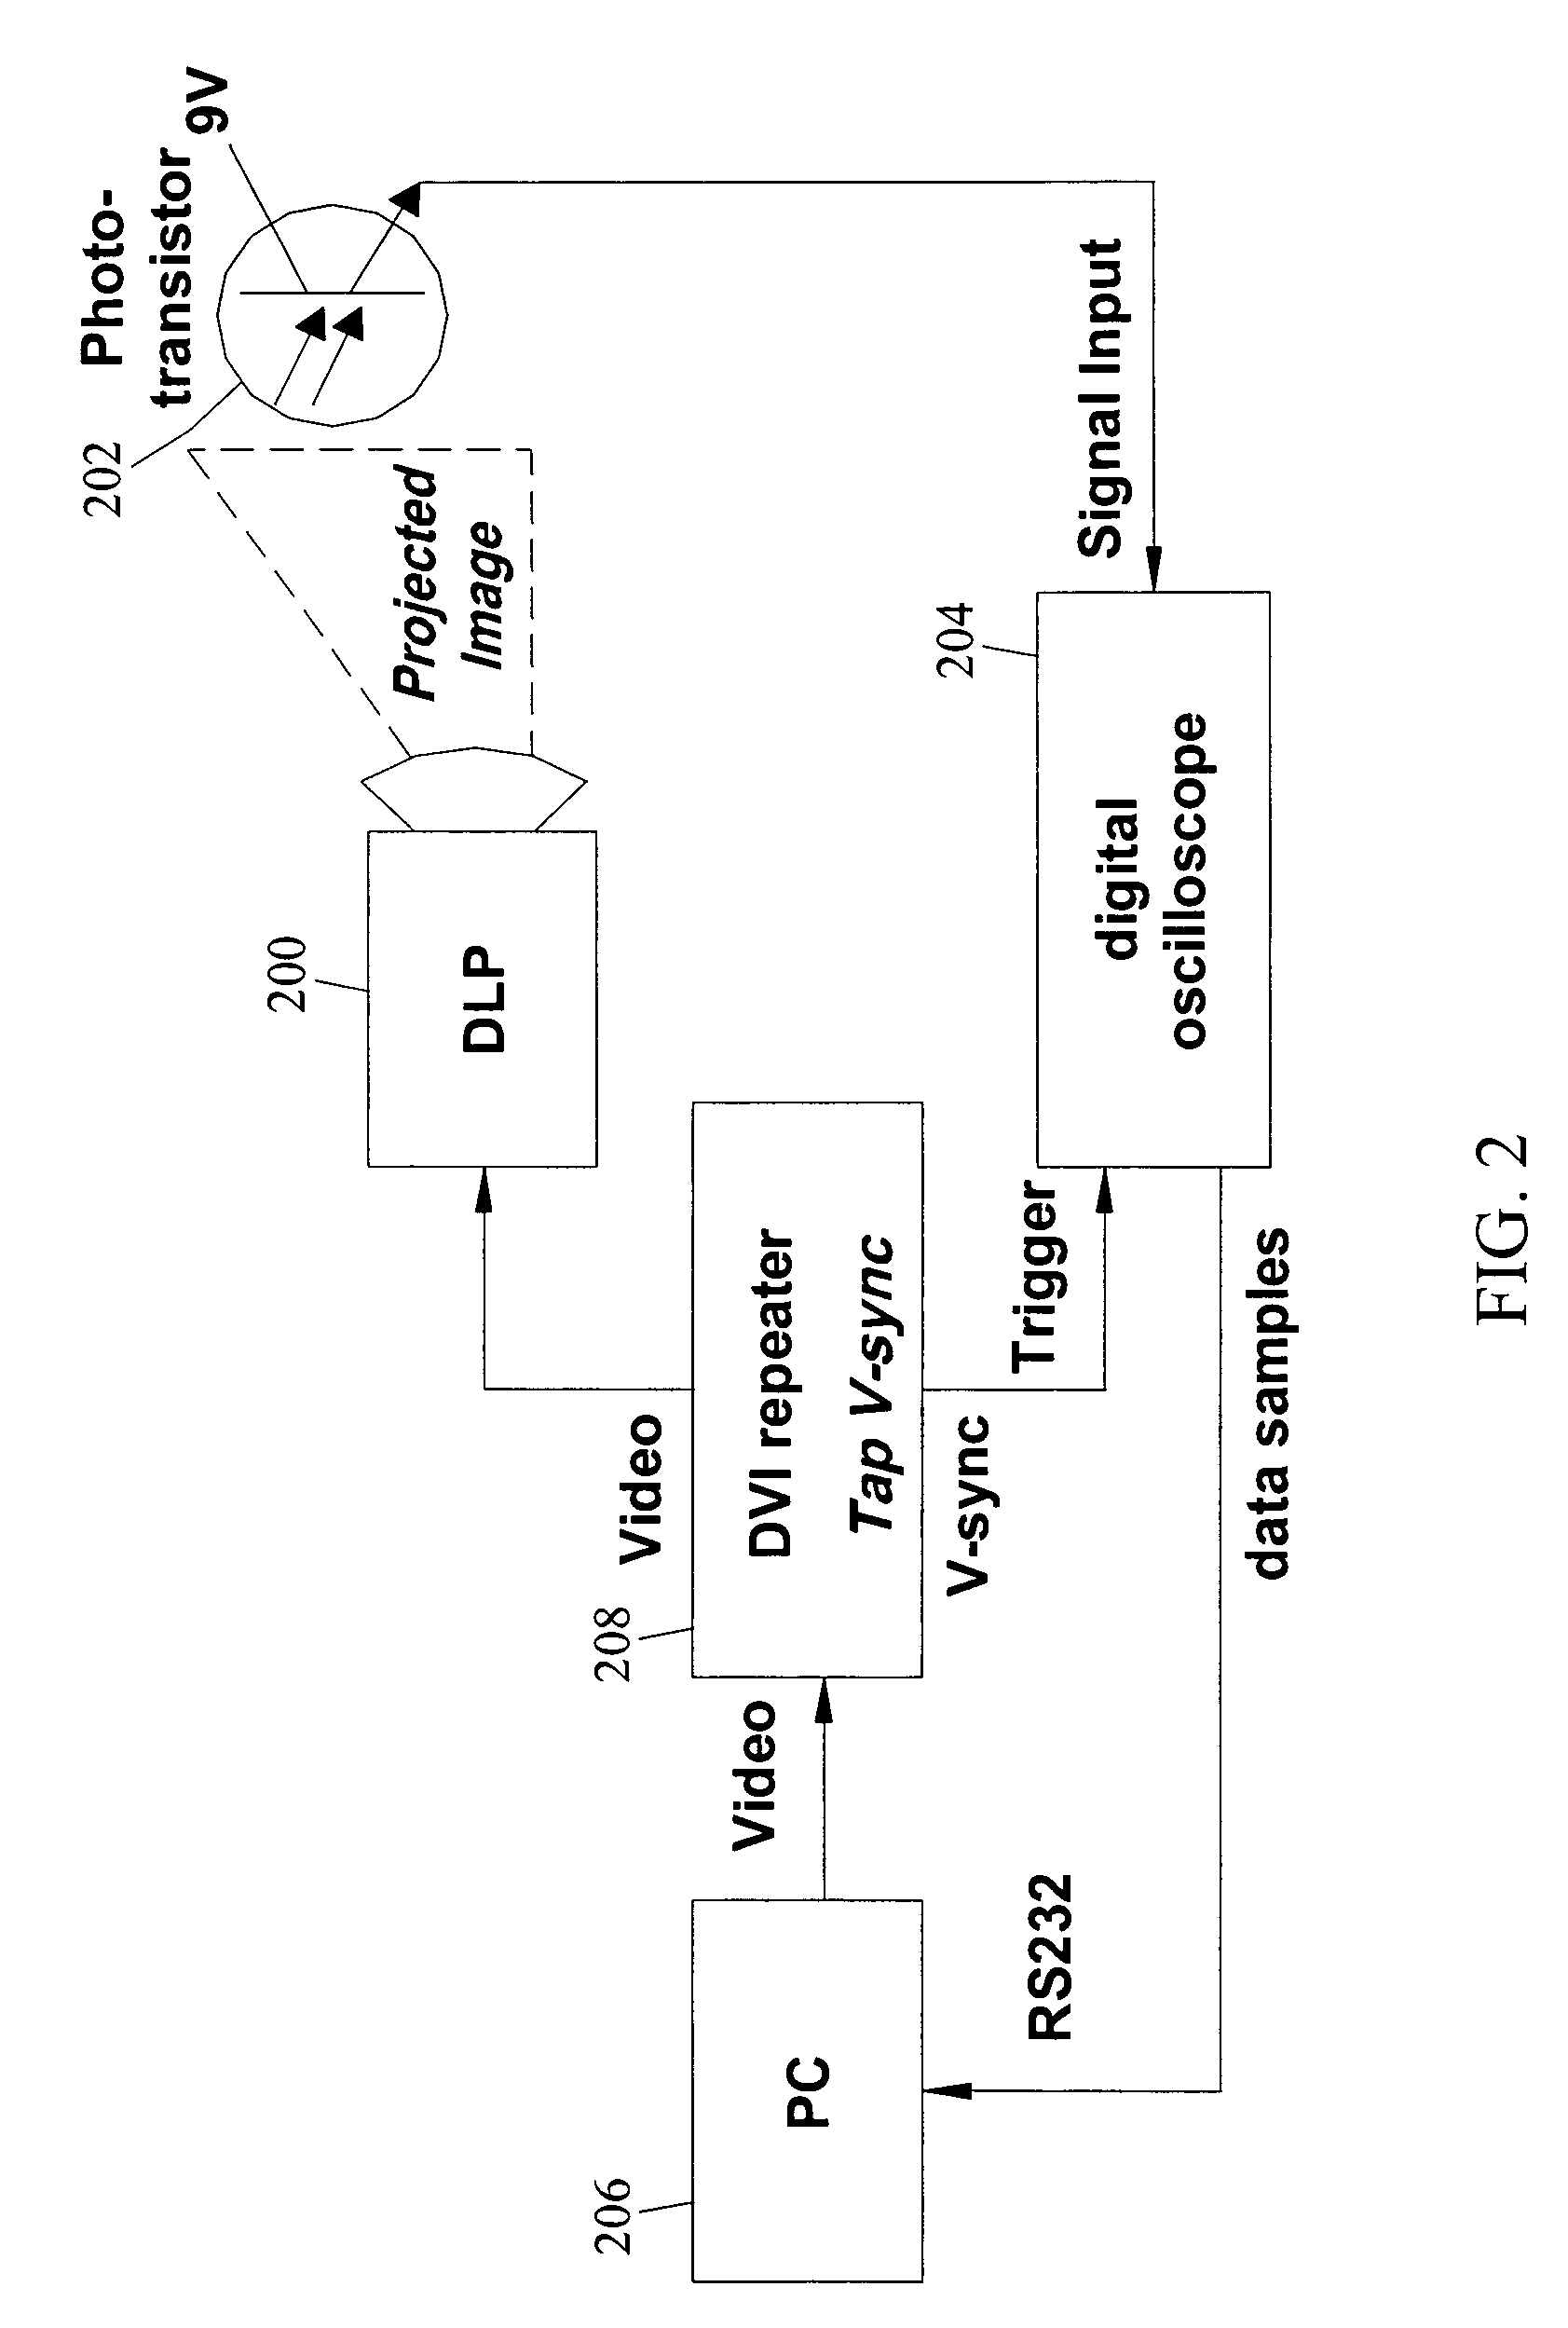 Methods, systems, and computer program products for imperceptibly embedding structured light patterns in projected color images for display on planar and non-planar surfaces